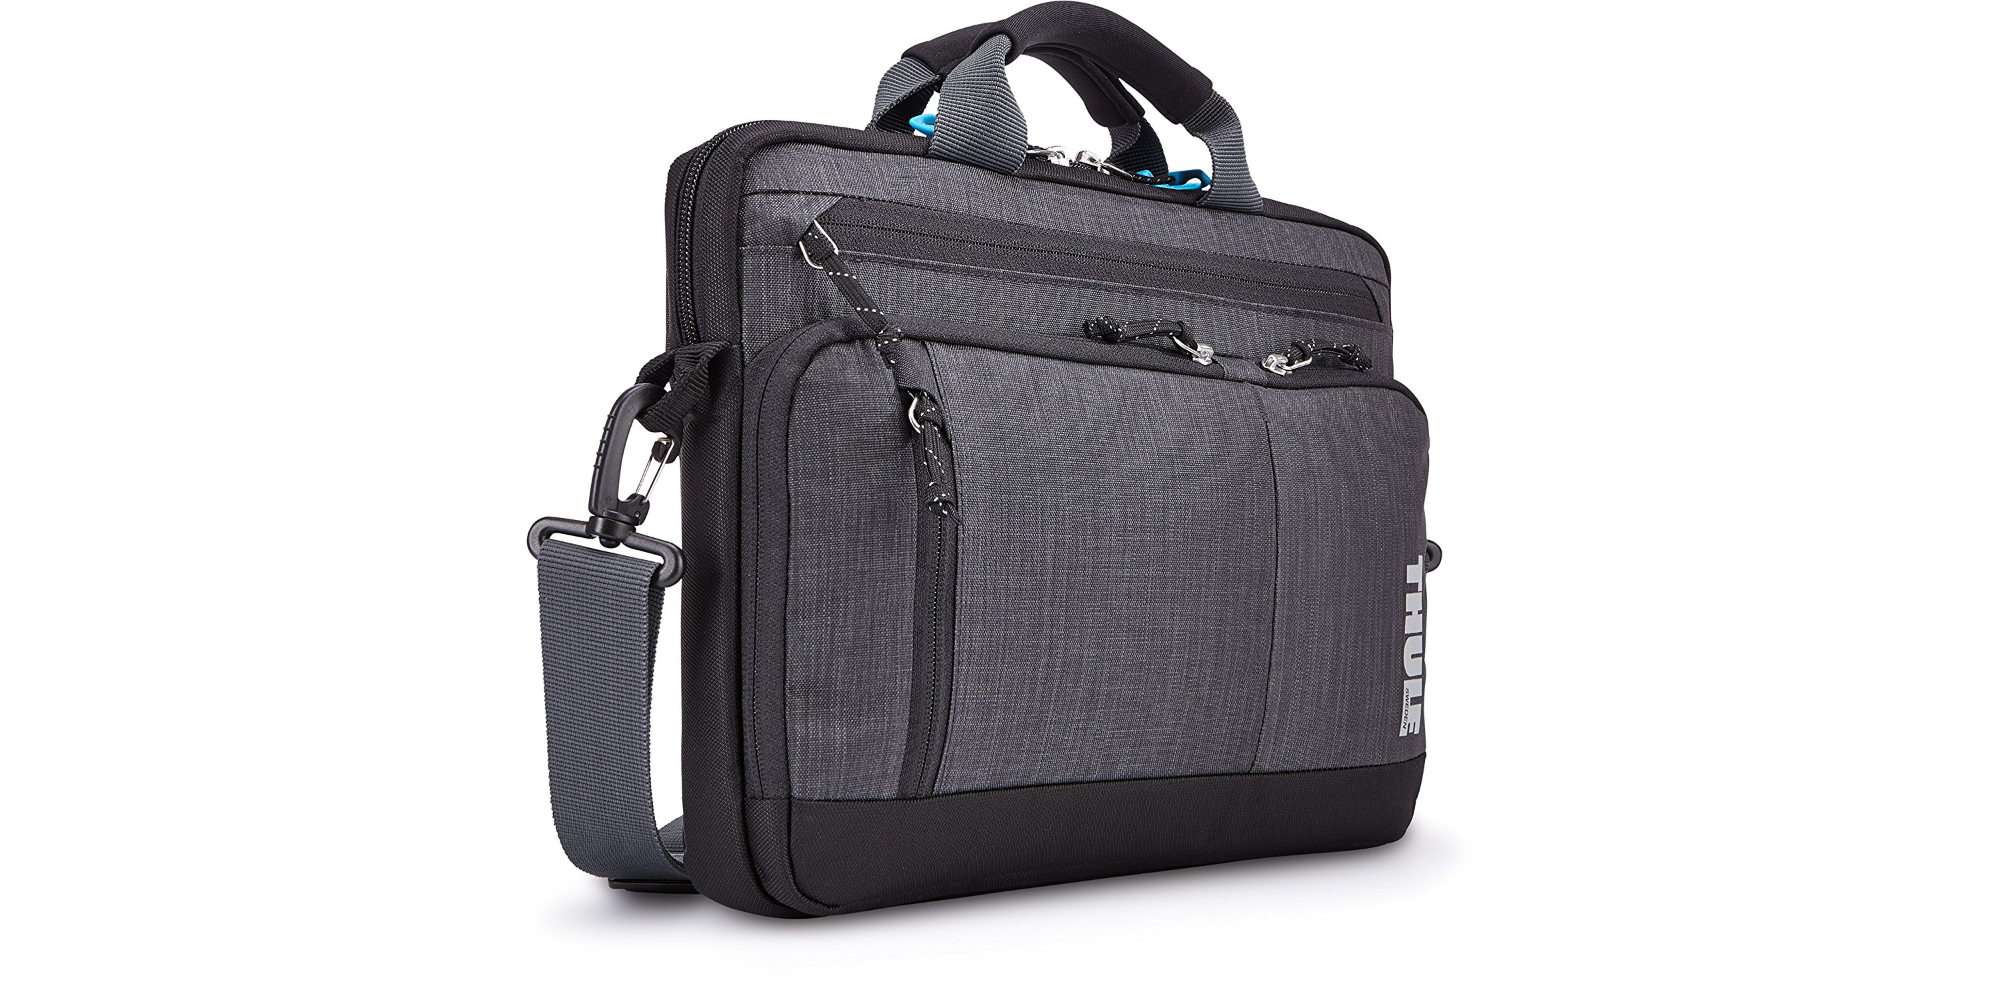 Tote your 13-inch MacBook in this Thule Carrying Case for $23 (Reg. $28) - 9to5Toys